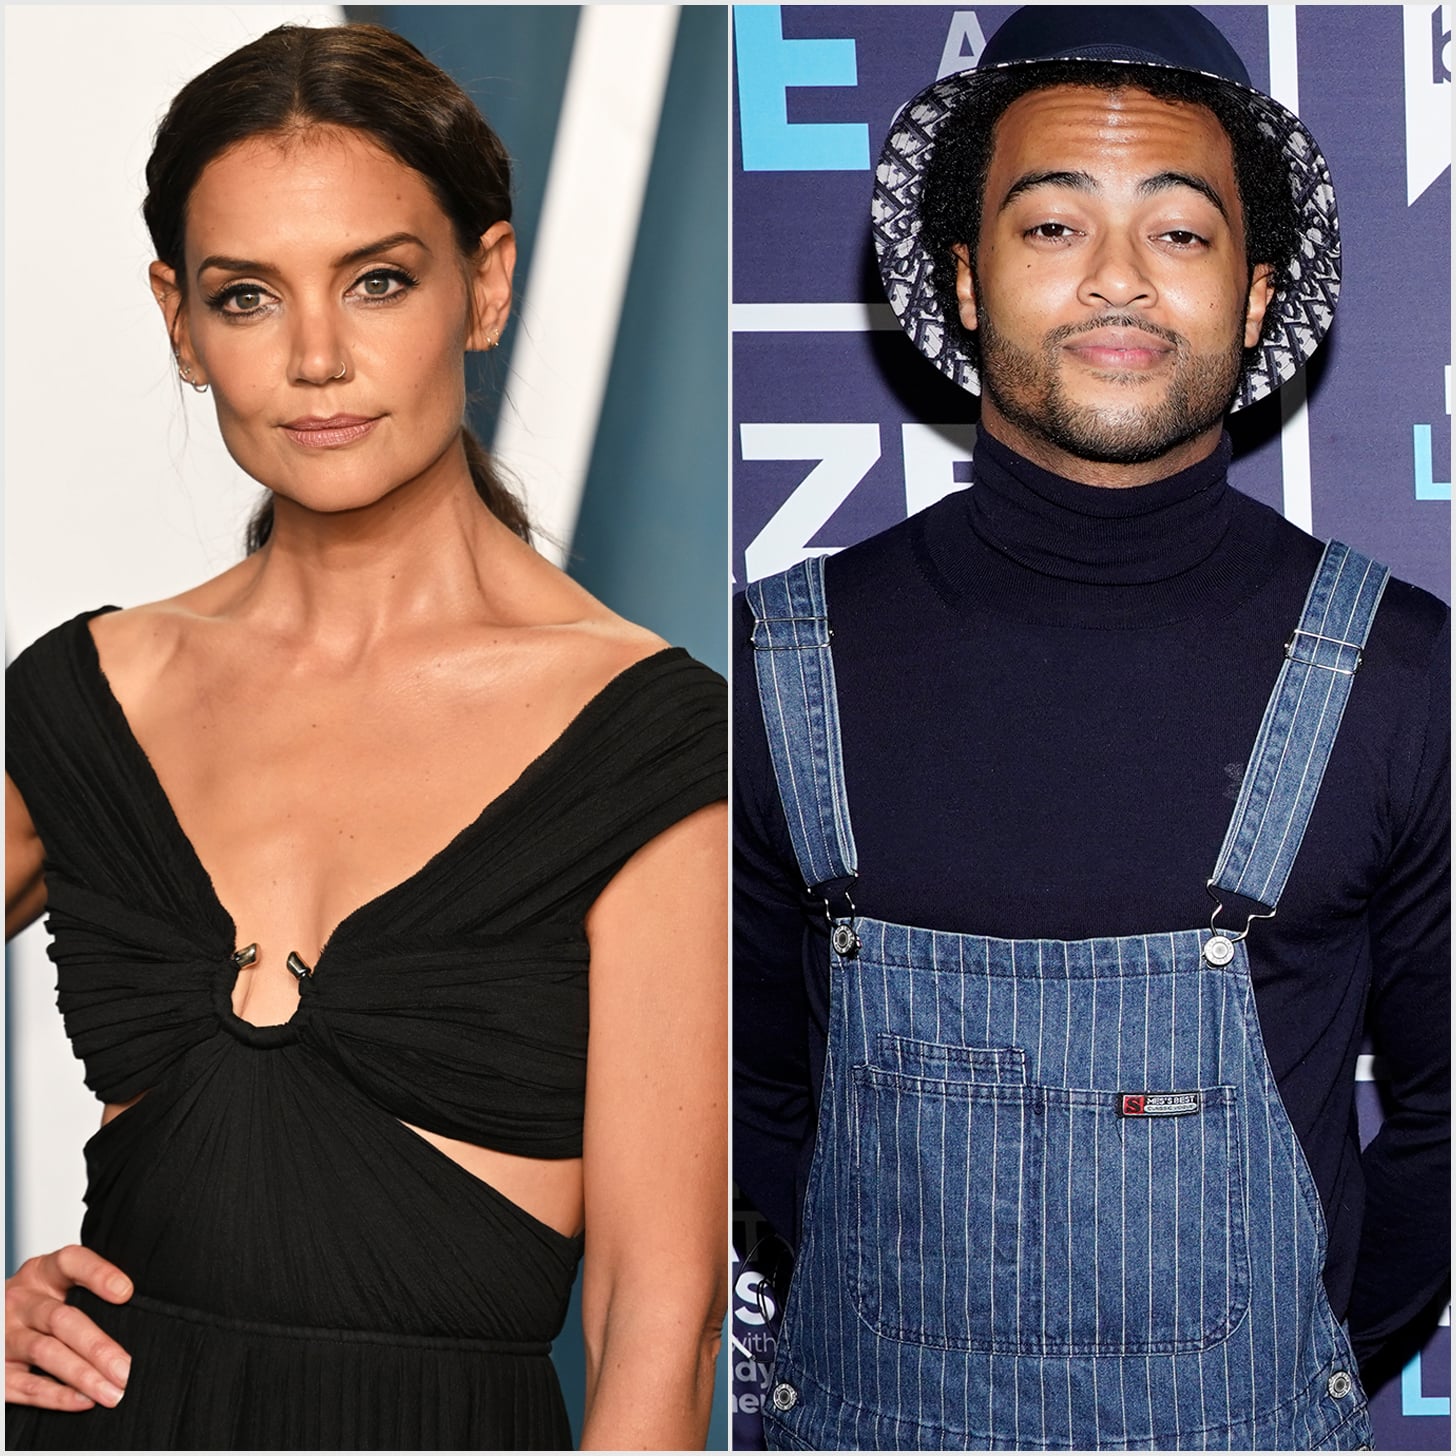 Who Is Katie Holmes Dating?